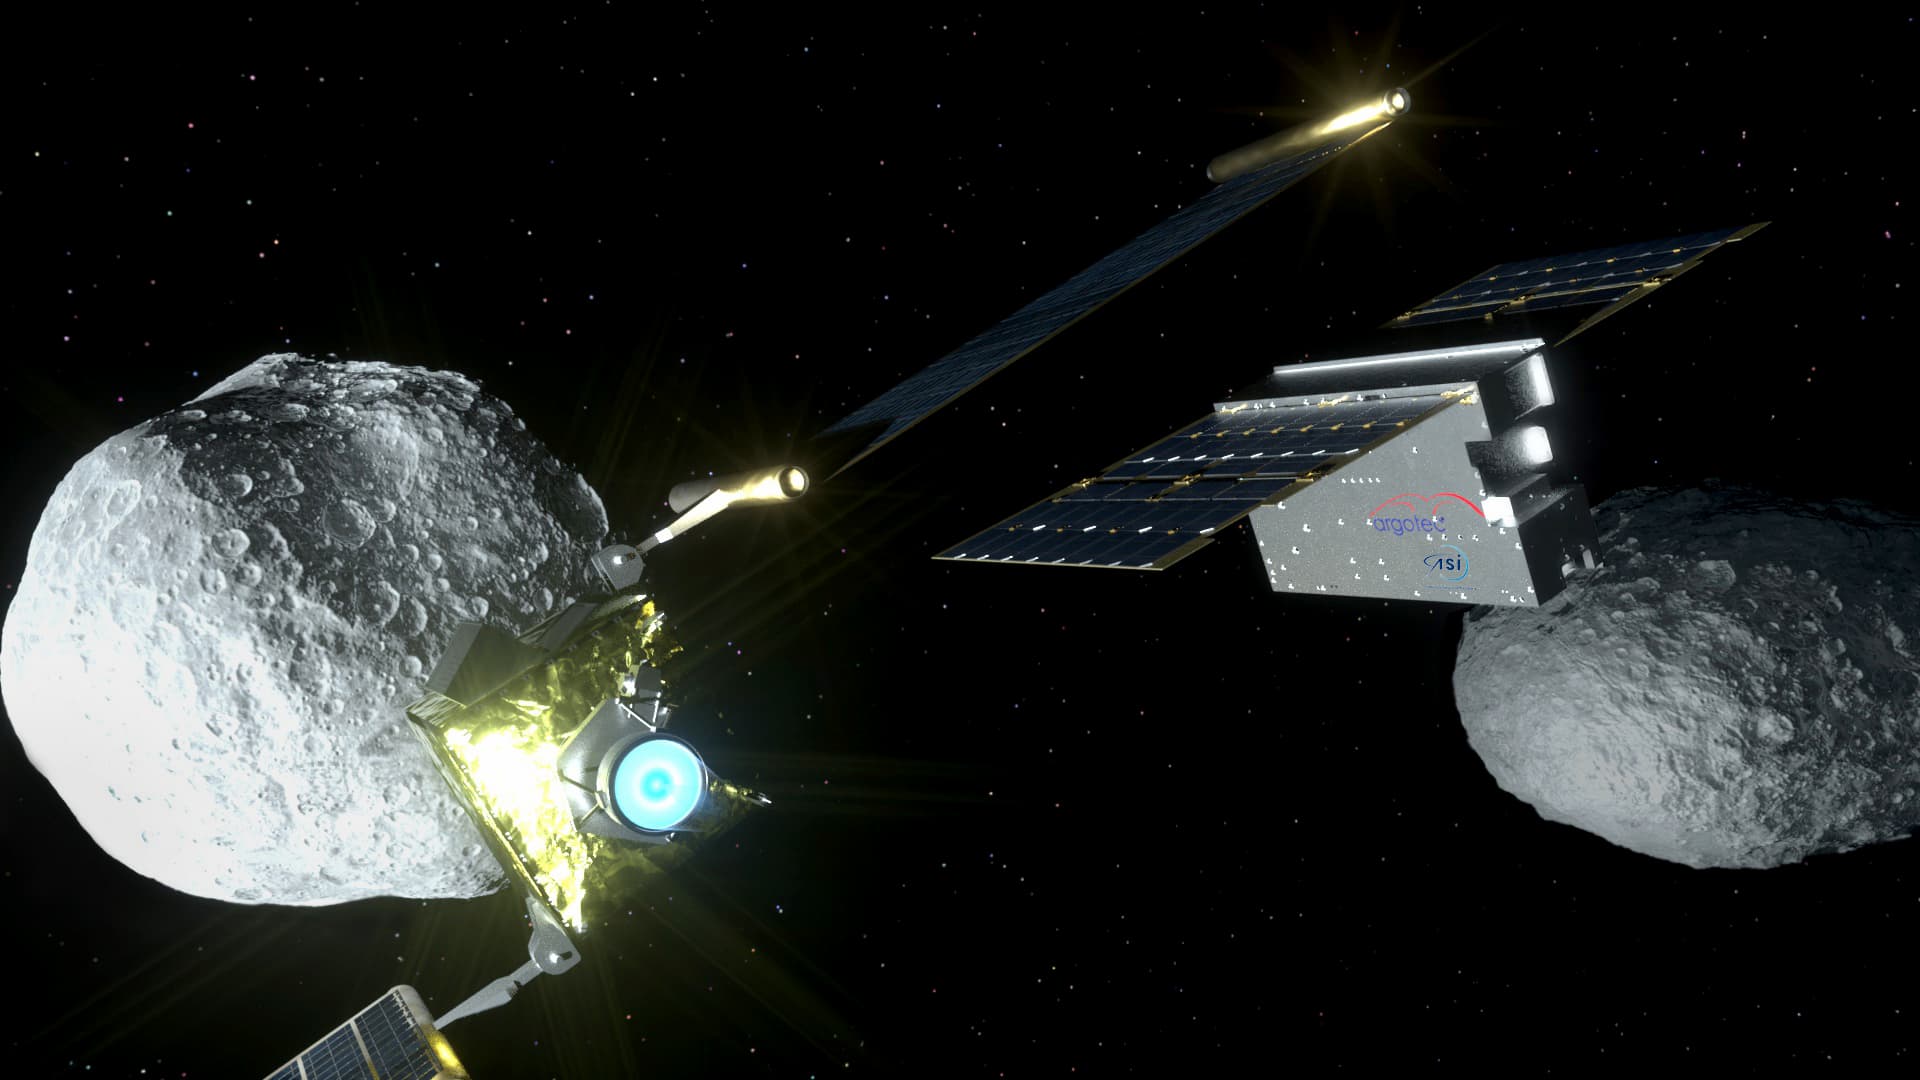 ASI - LICIACube flies with DART towards the asteroid. An Italian special envoy to the deep space